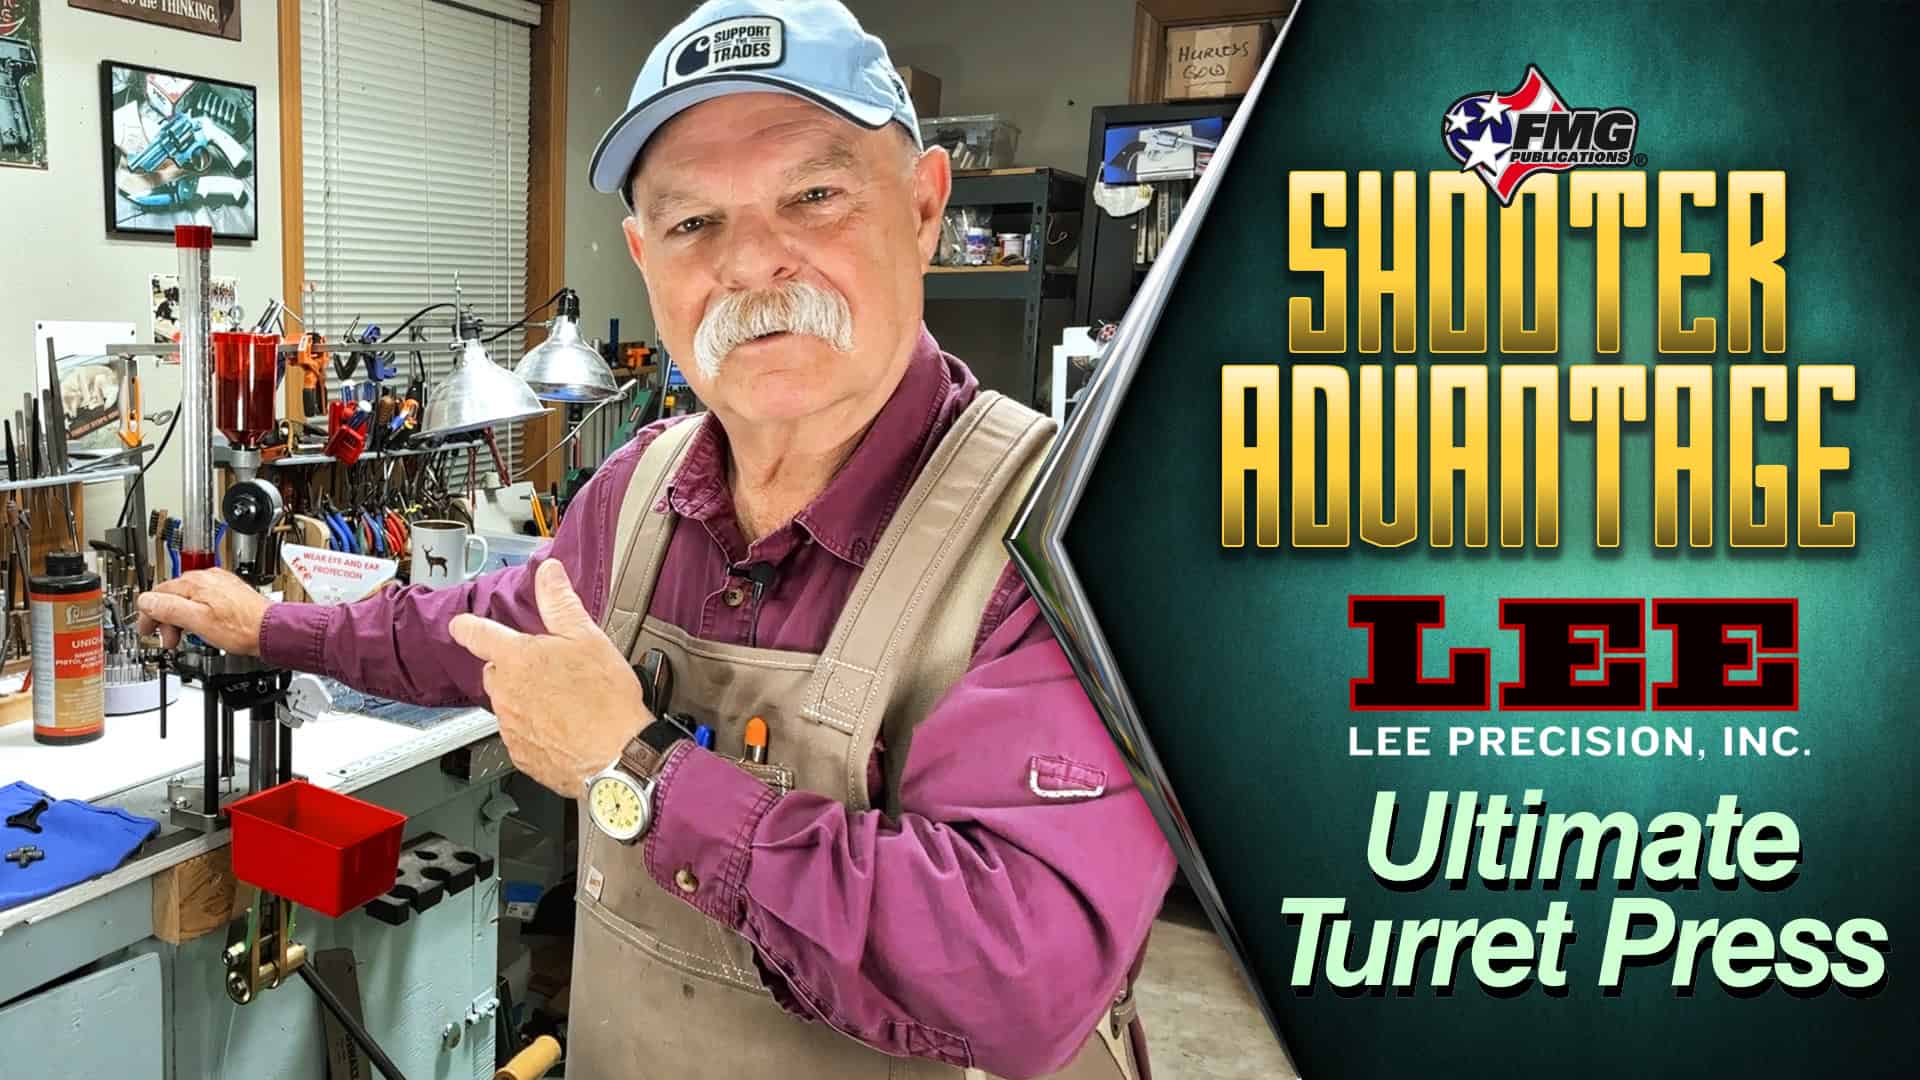 Roy Huntington with the Lee Precision Ultimate Turret Press